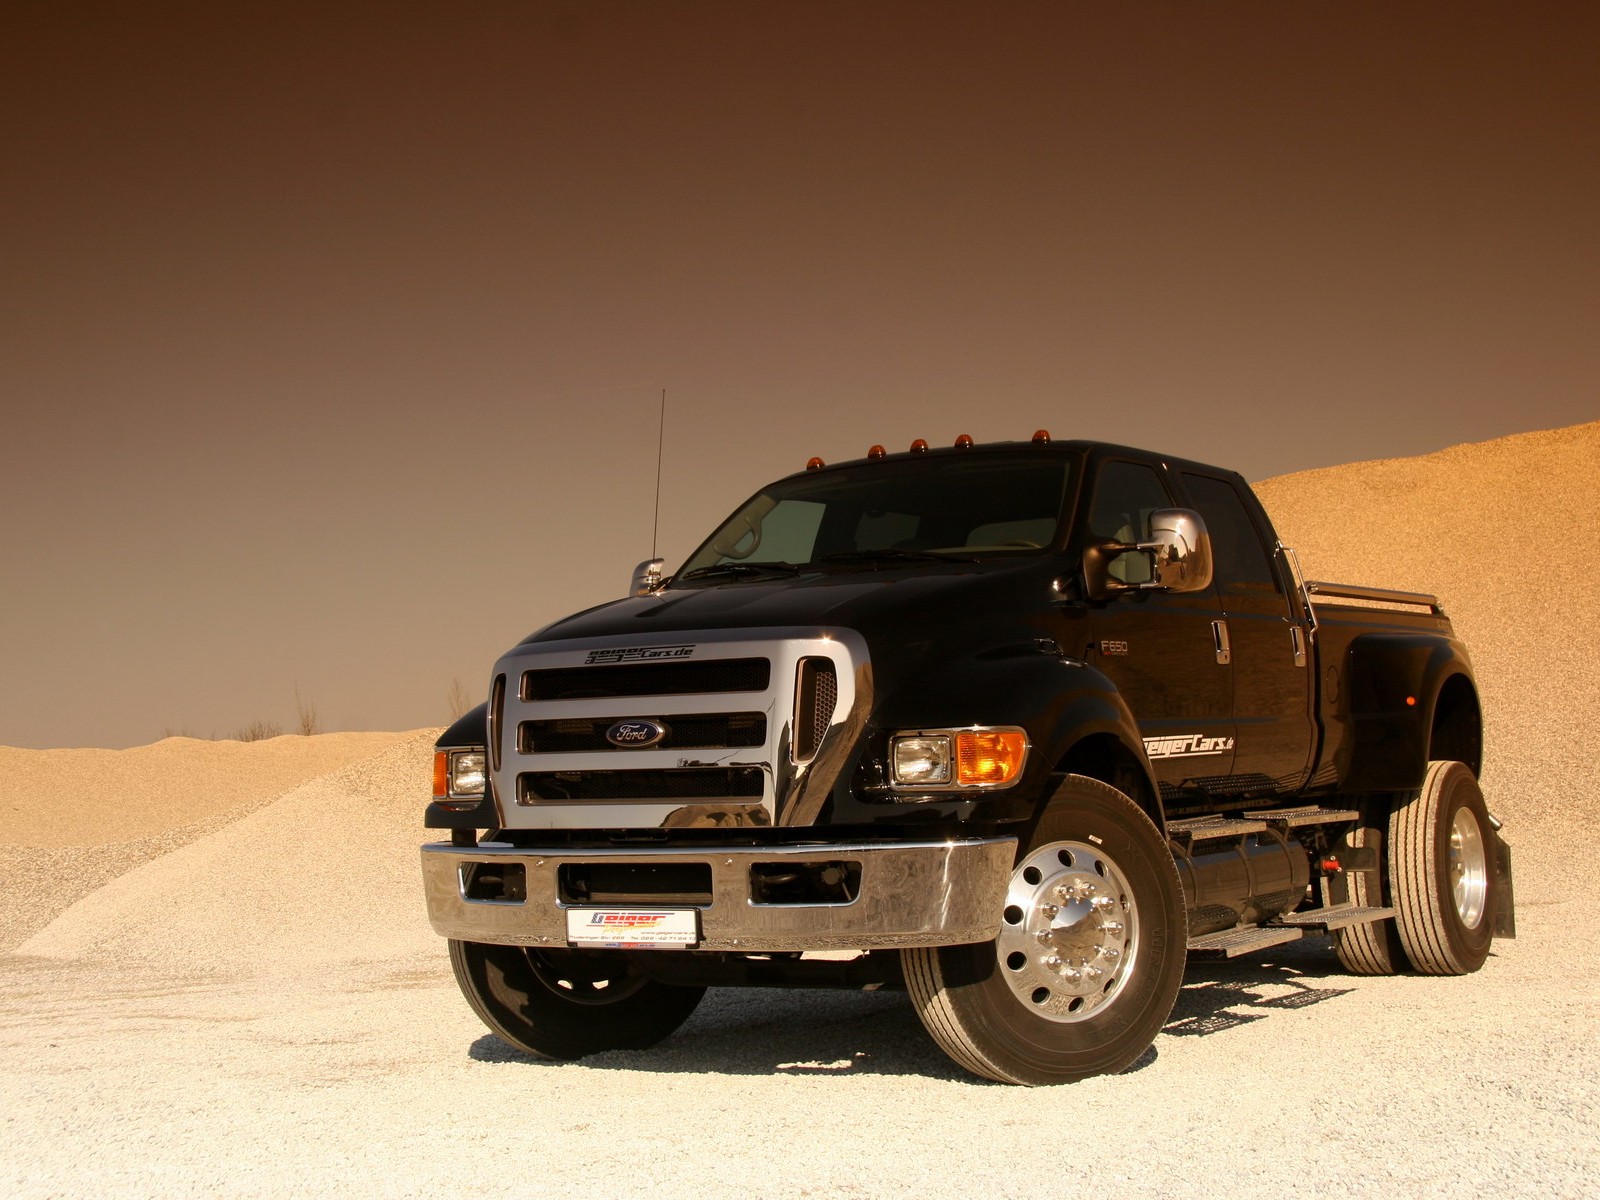 Free Download Ford Truck Wallpaper Ford F650 2107530 Hd Wallpaper Download 1600x1200 For Your Desktop Mobile Tablet Explore 44 F650 Wallpaper F650 Wallpaper